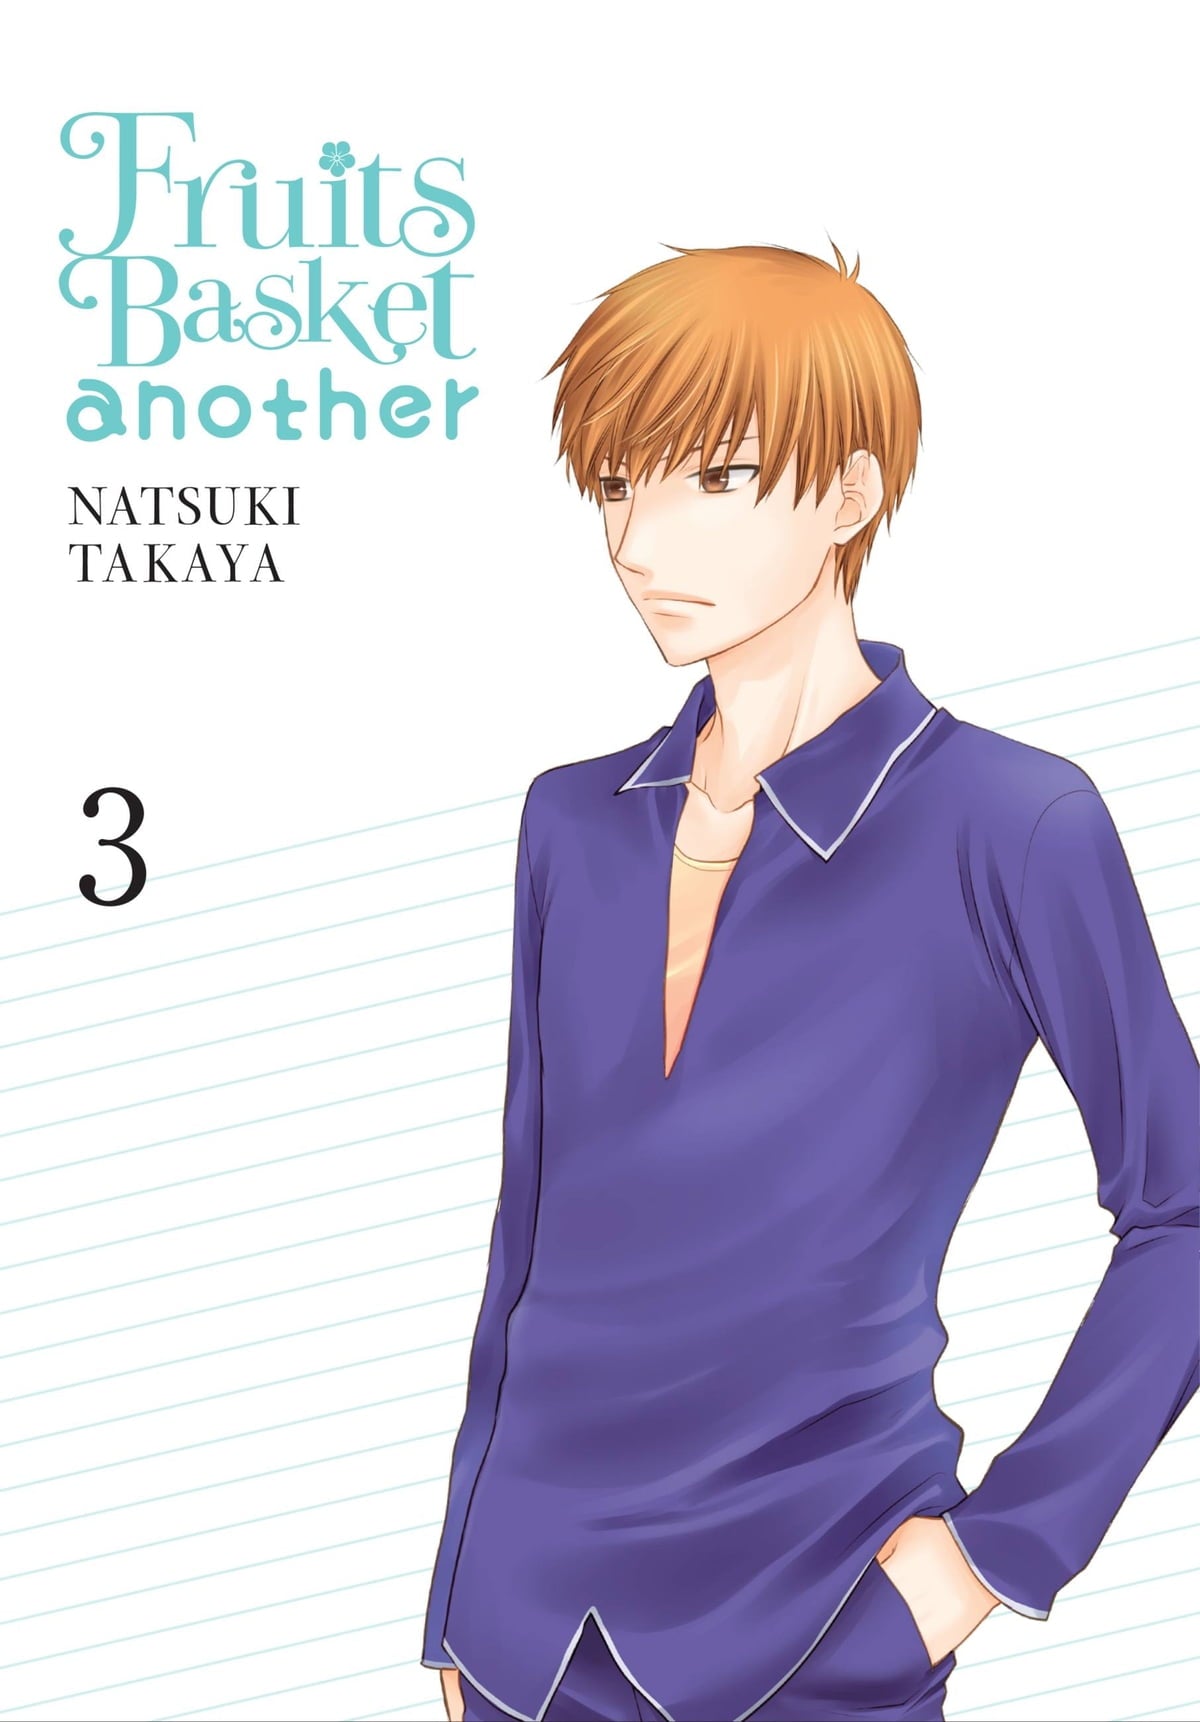 Fruits Basket Another Vol. 03